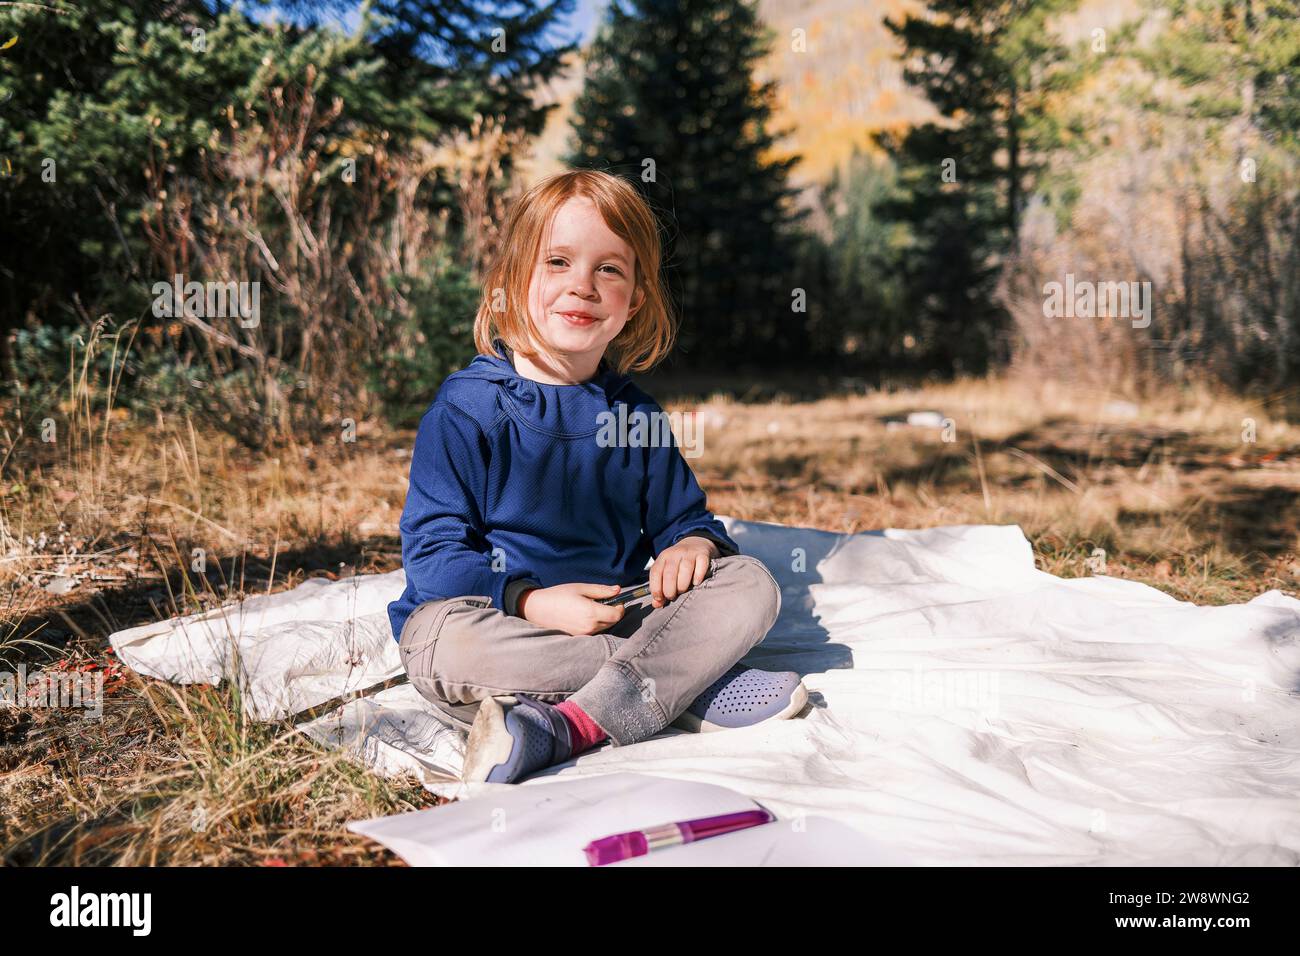 Smiling child sitting in the sun, looking at camera with happiness Stock Photo